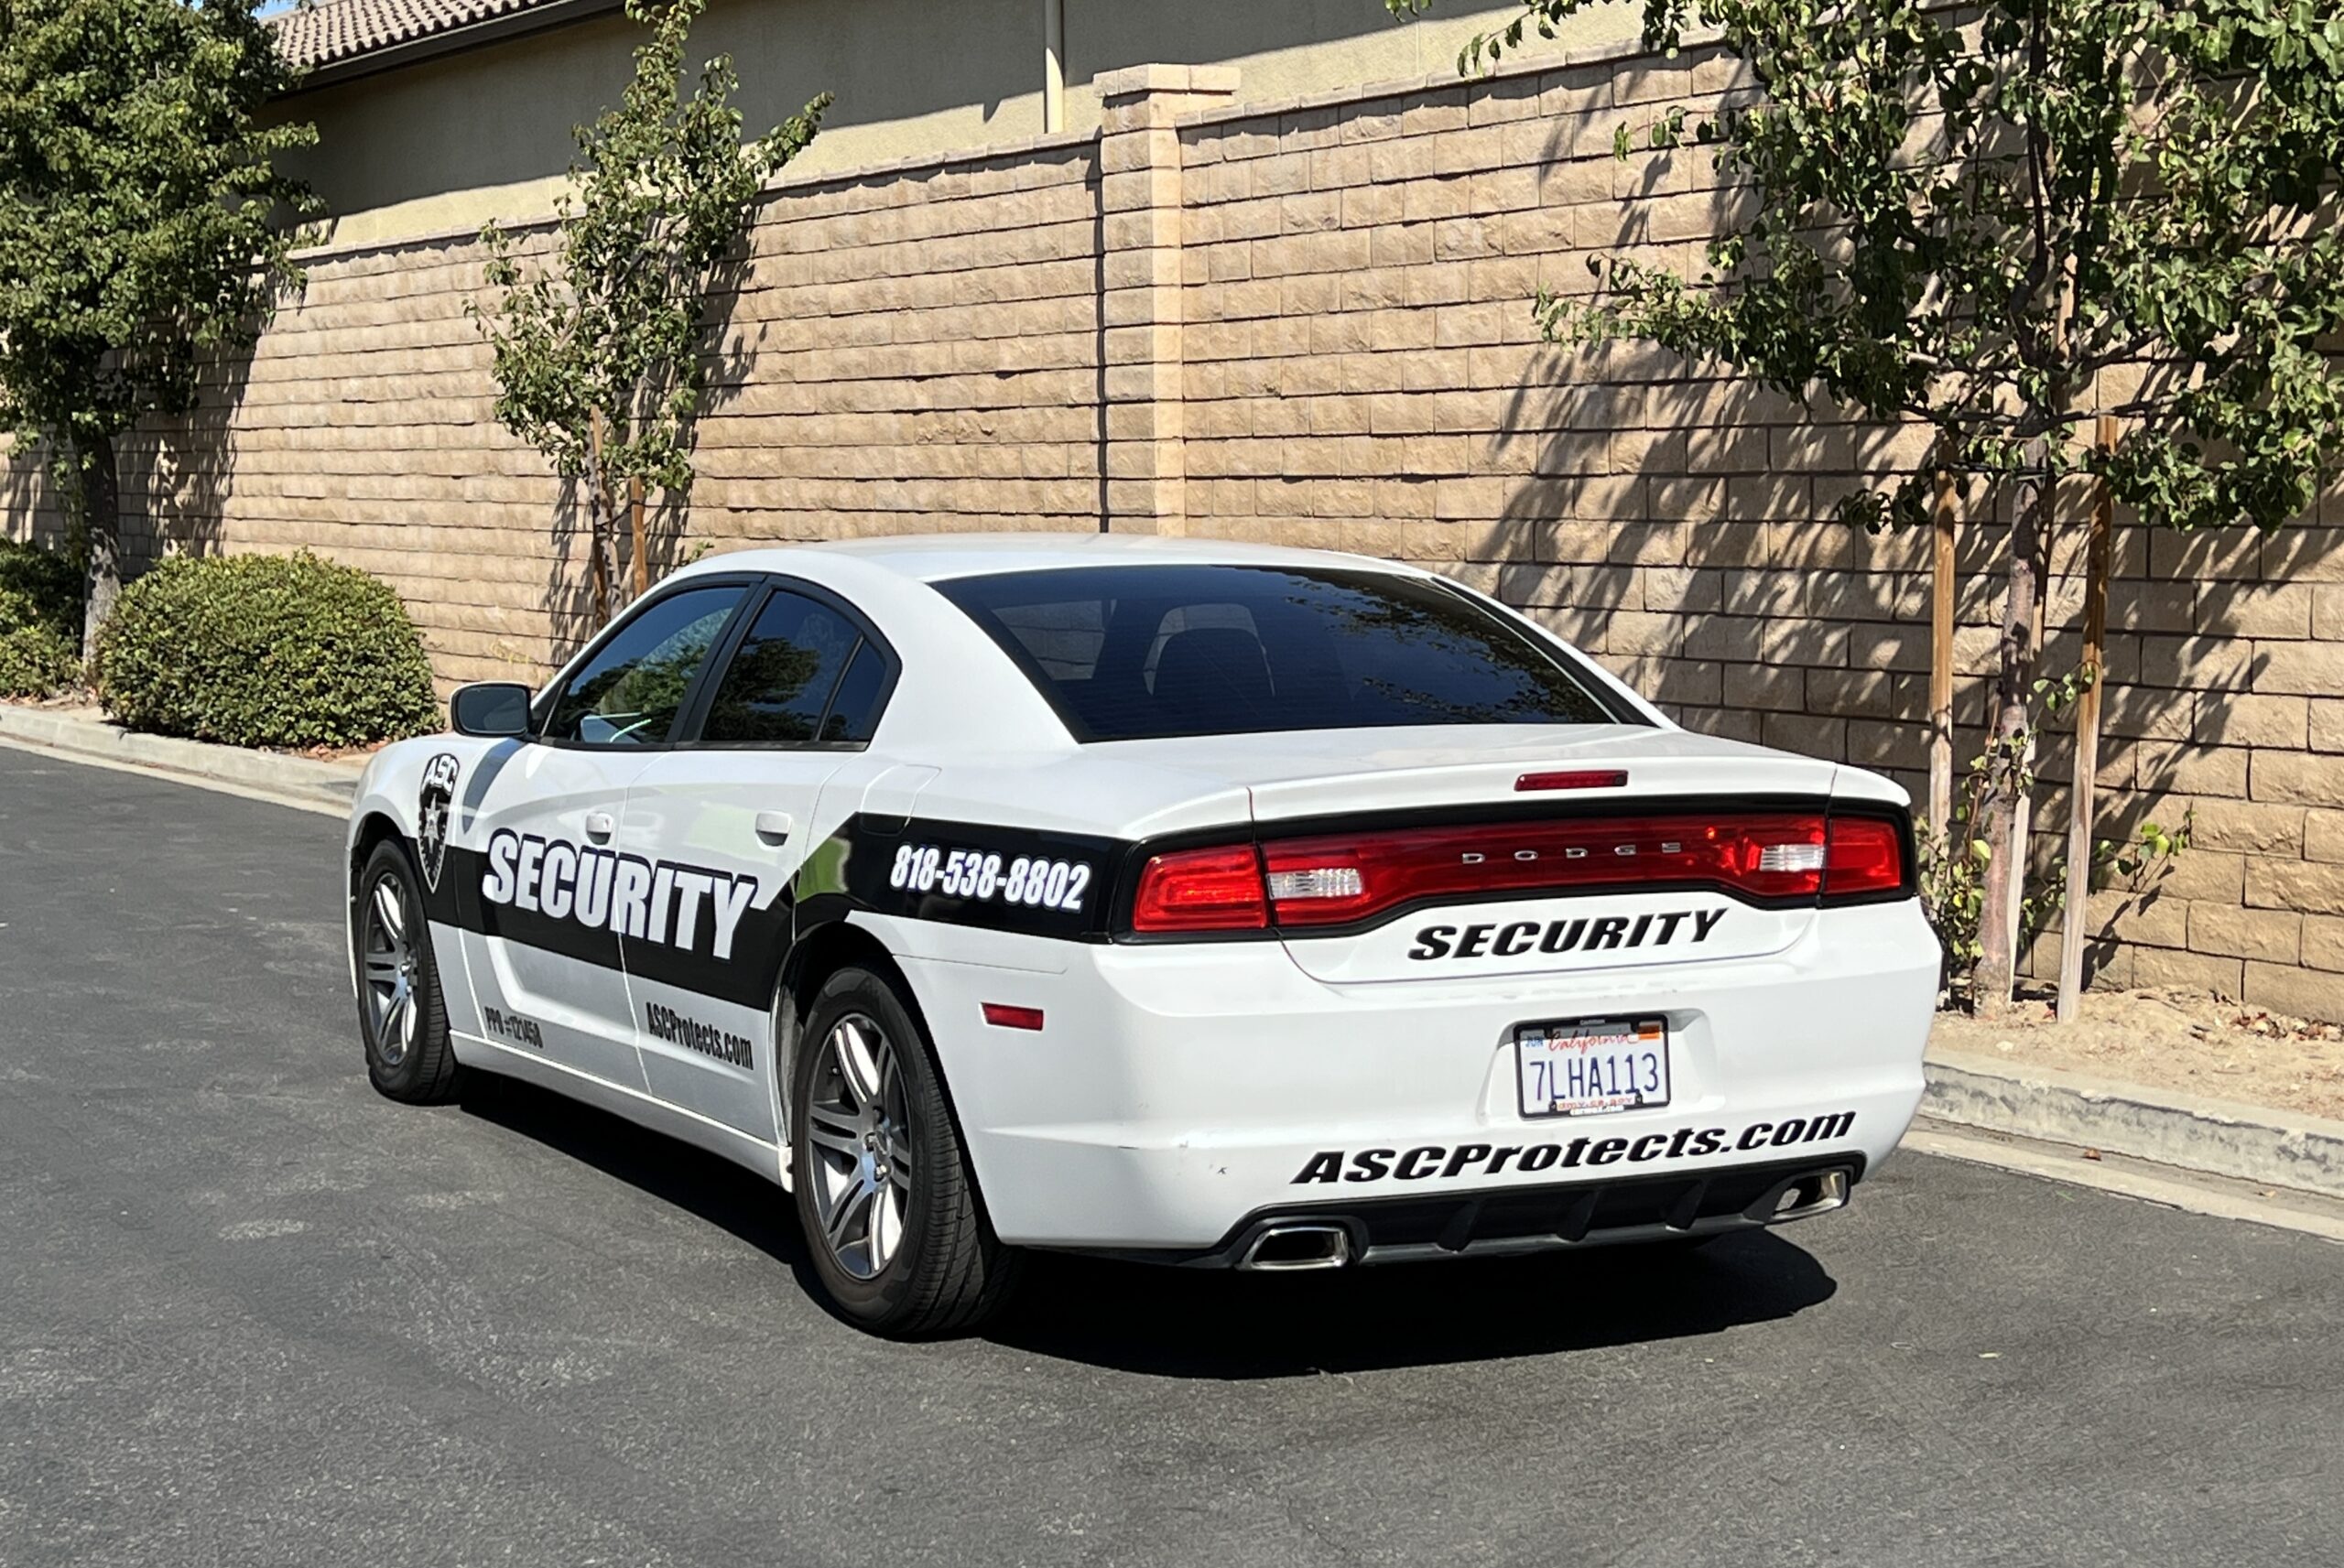 Back view of ASC Private Security's mobile patrol car